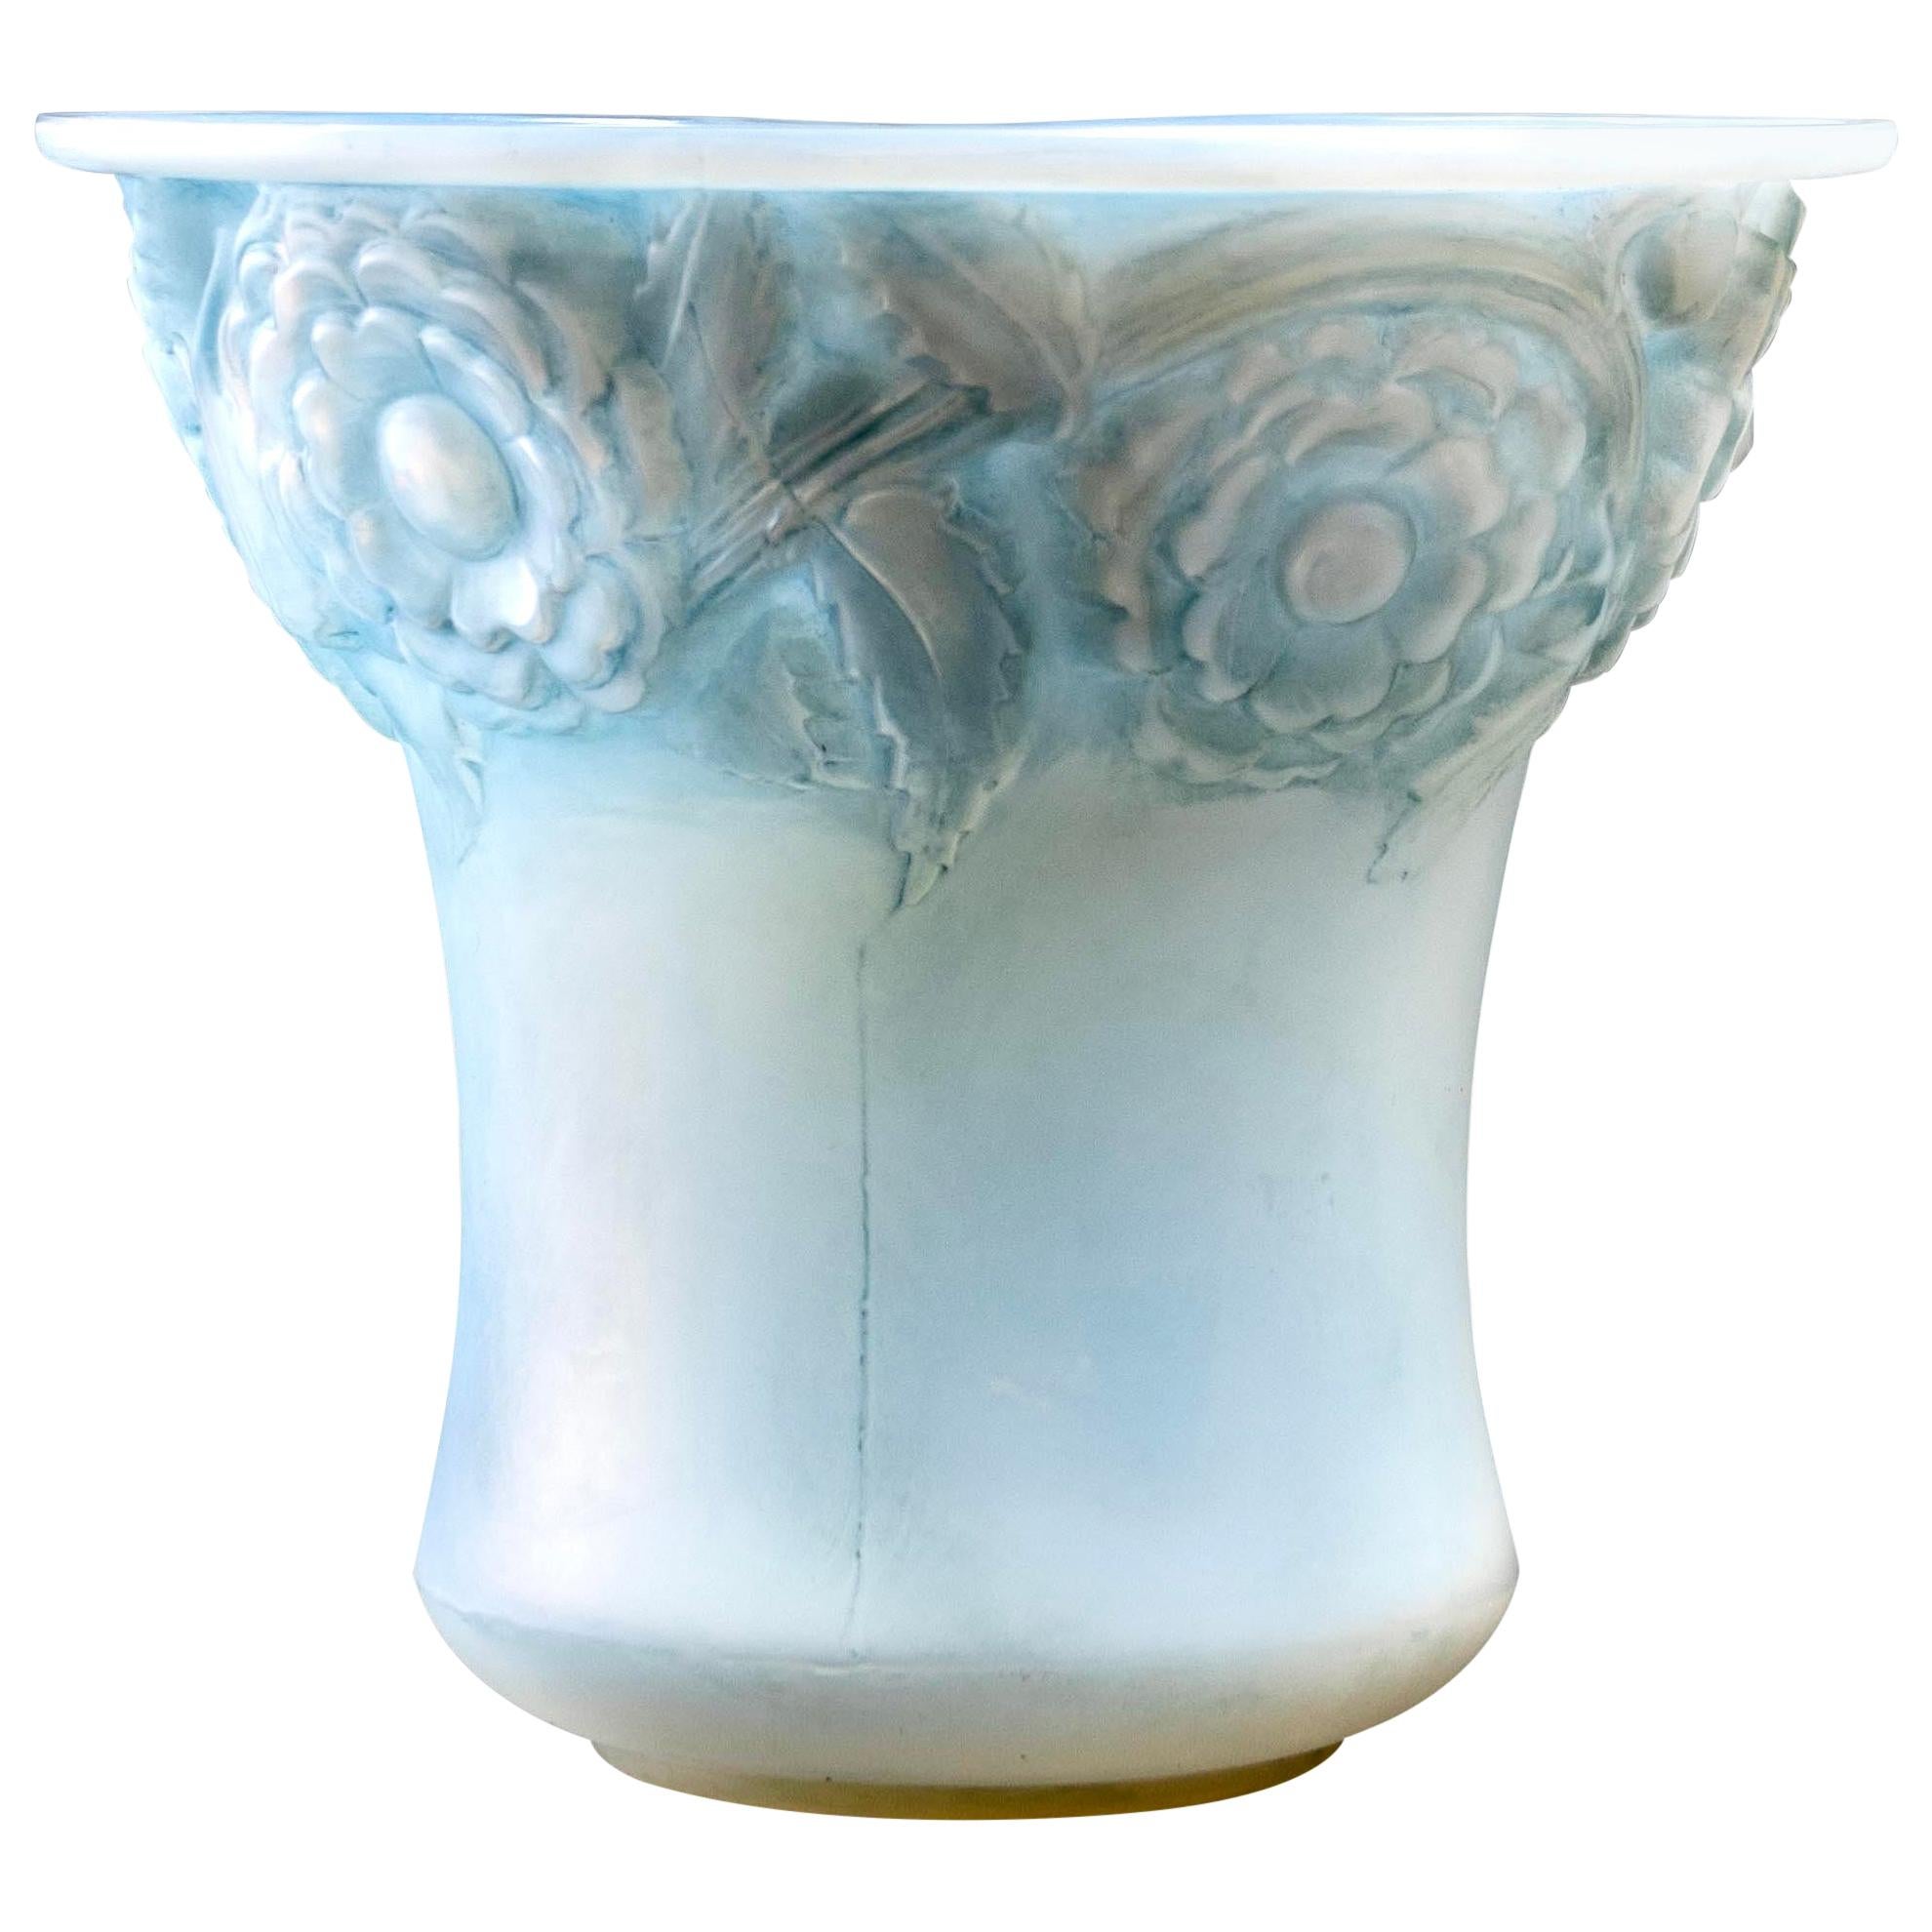 1930 René Lalique Orleans Vase in Double Cased Opalescent Glass with Blue Patina